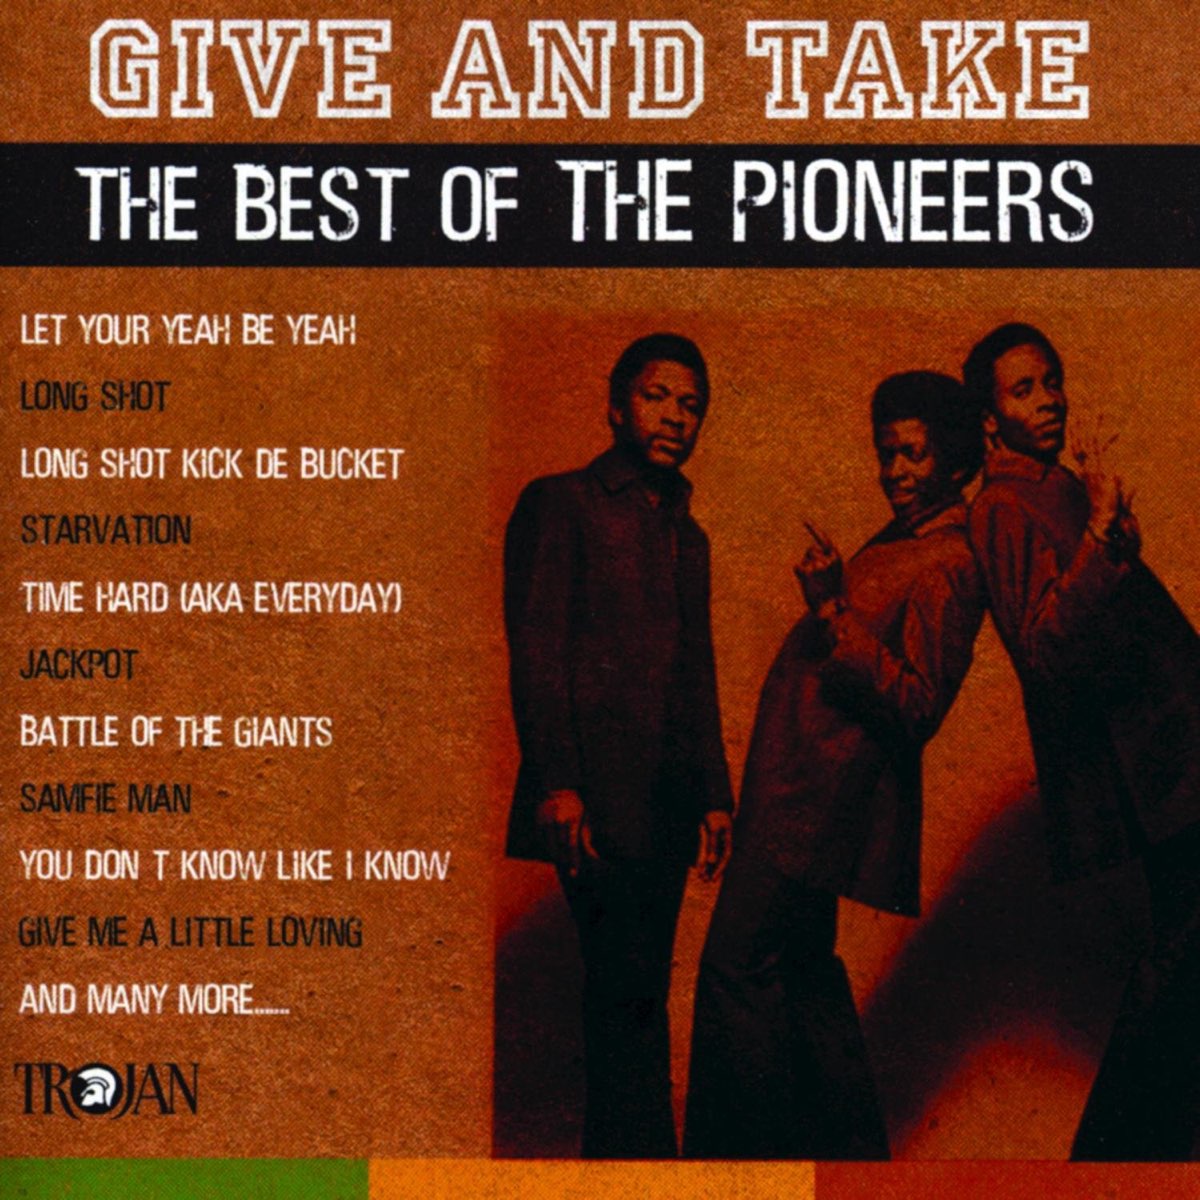 Give a little love перевод на русский. Pioneer. The Pioneer Cambridge. Give a hard time. The Pioneers Бохмаро.